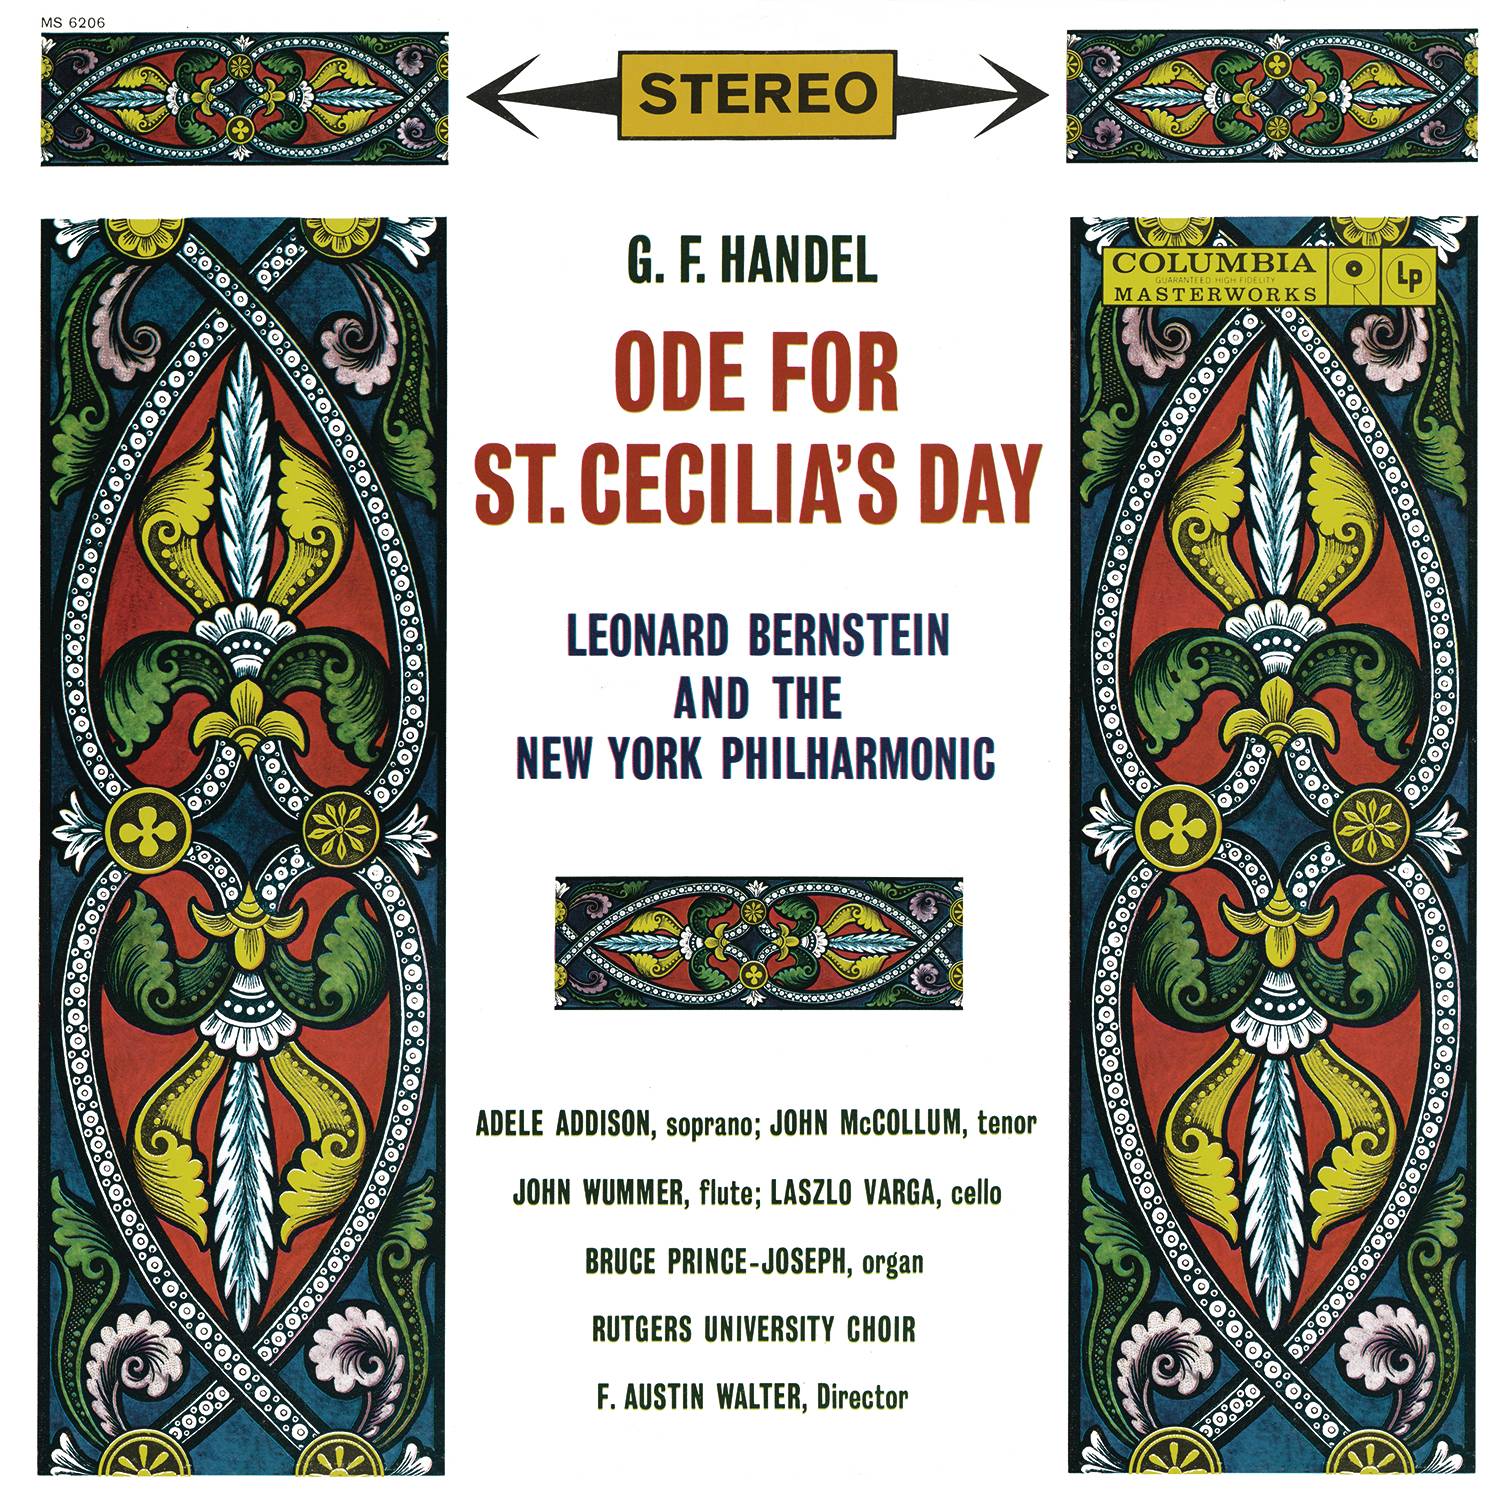 Ode For St. Cecilia's Day, HWV 76:No. 7, Sharp violins proclaim their jealous pangs (Aria)